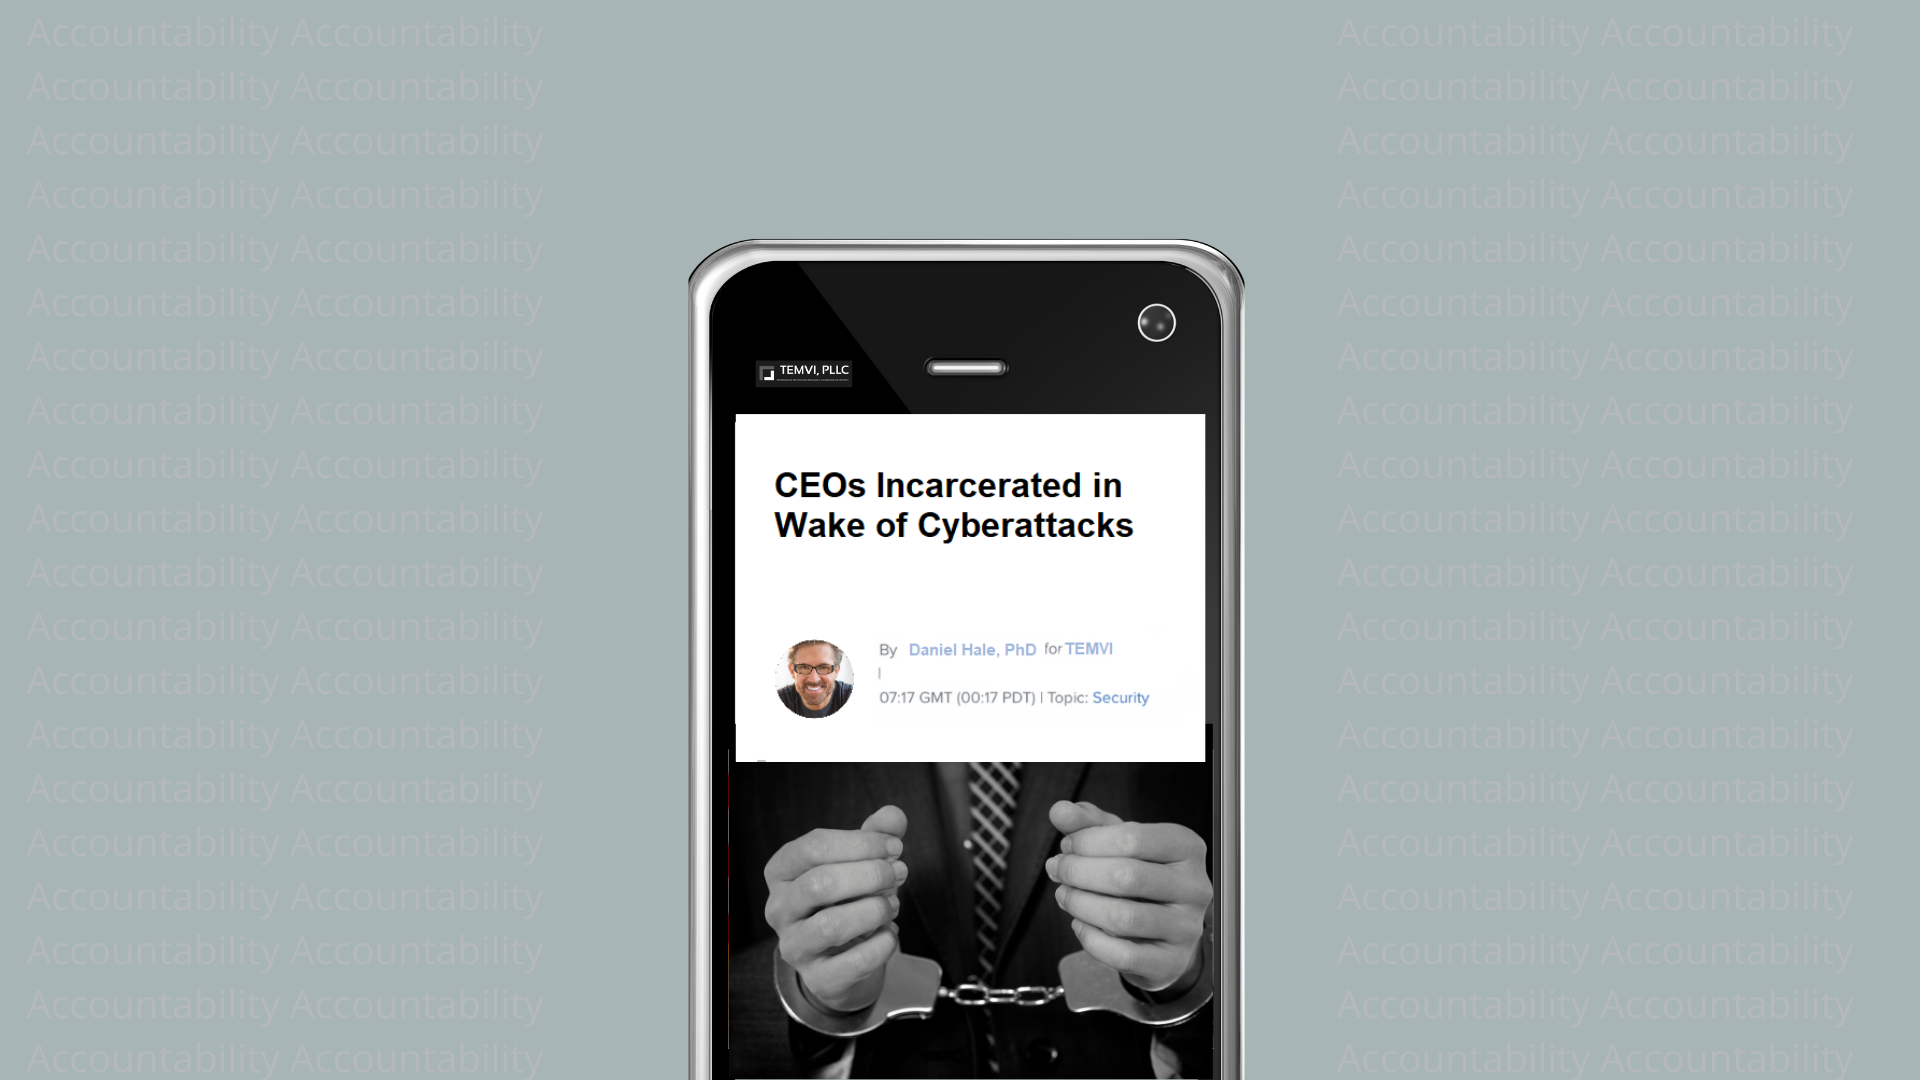 CEOs Incarcerated for Cyber Attacks